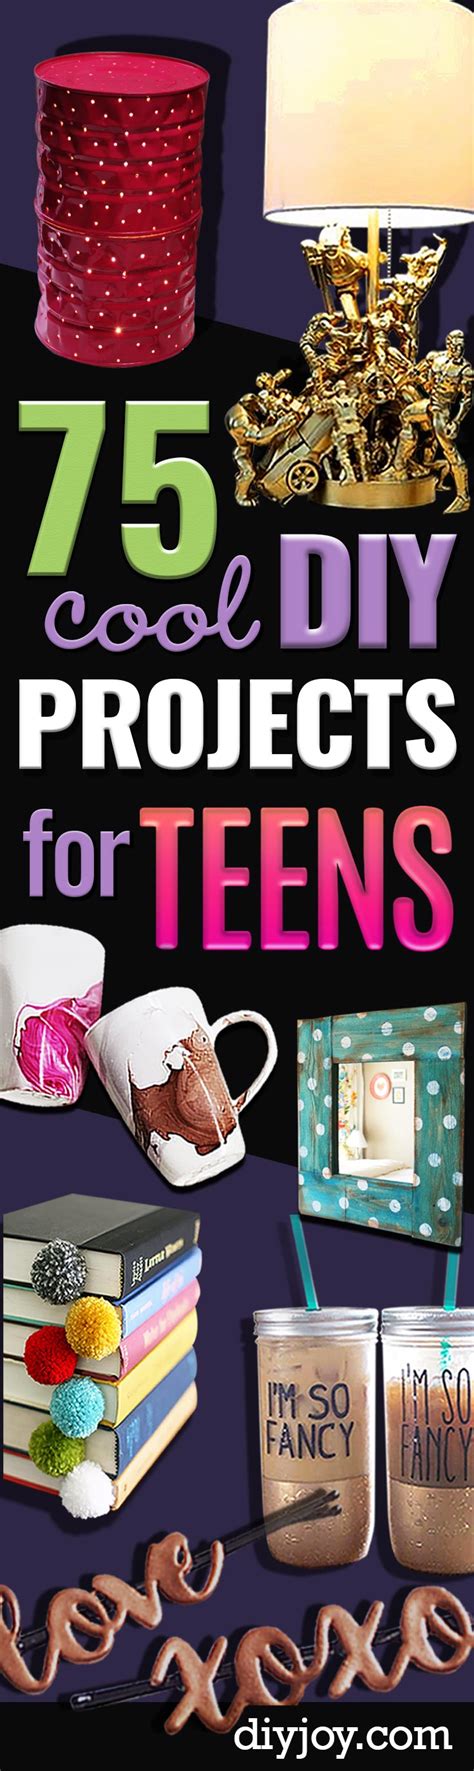 75 Cool Diy Projects For Teenagers Dyi Teen Crafts For Tweens And Teens